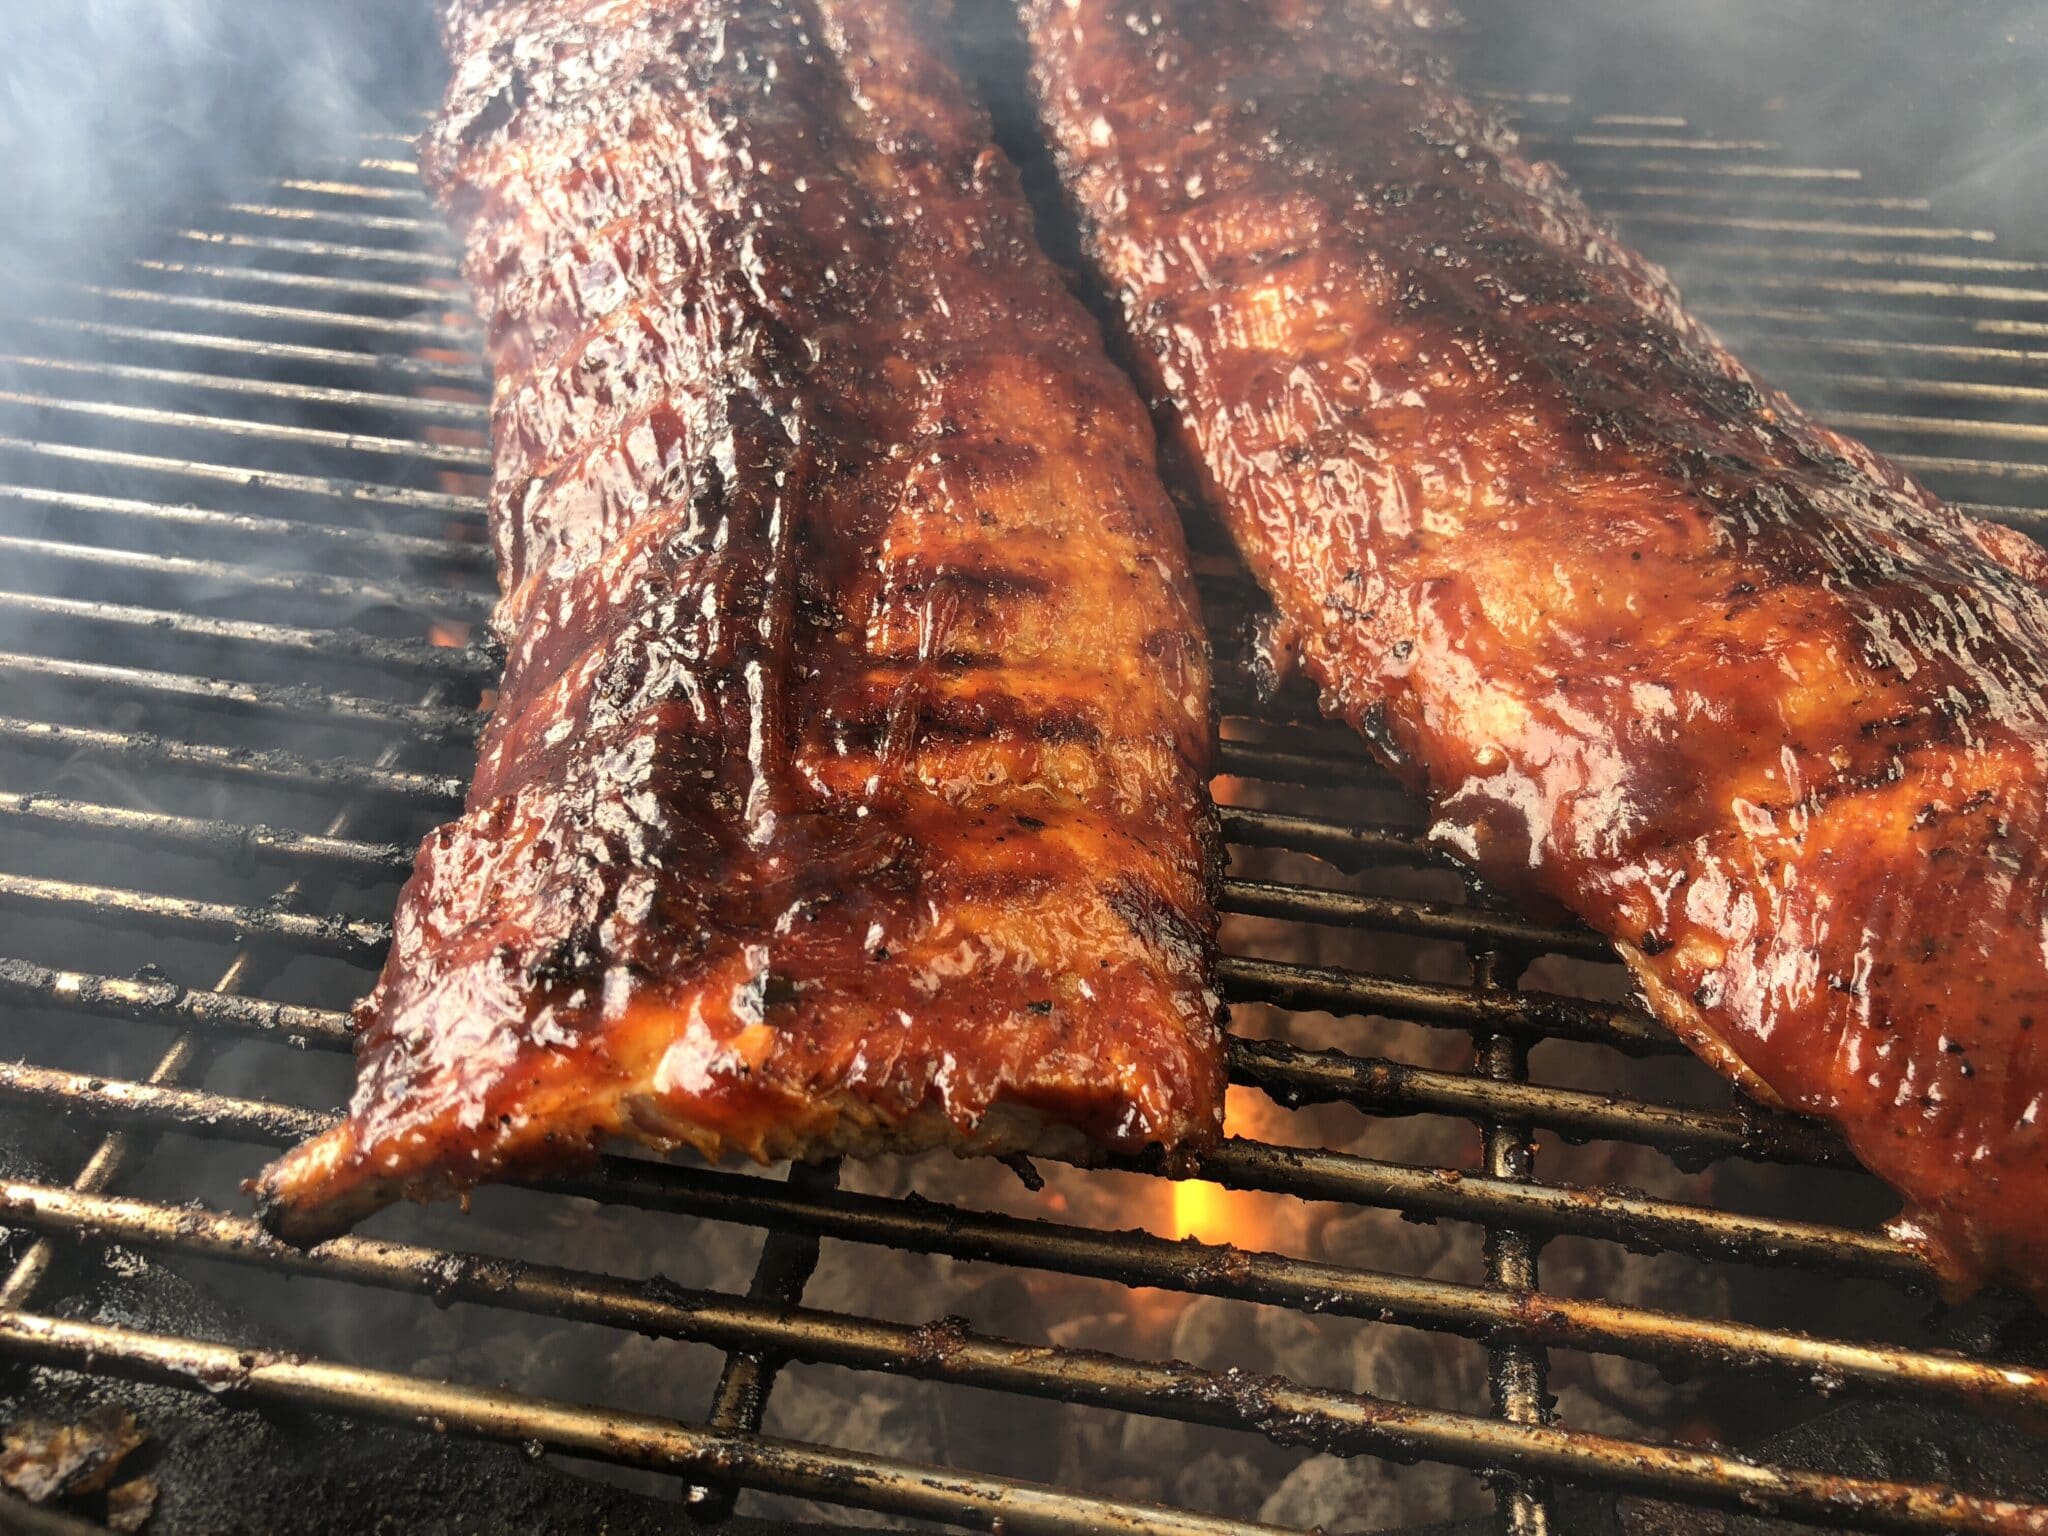 BBQ ribs on a flame grill